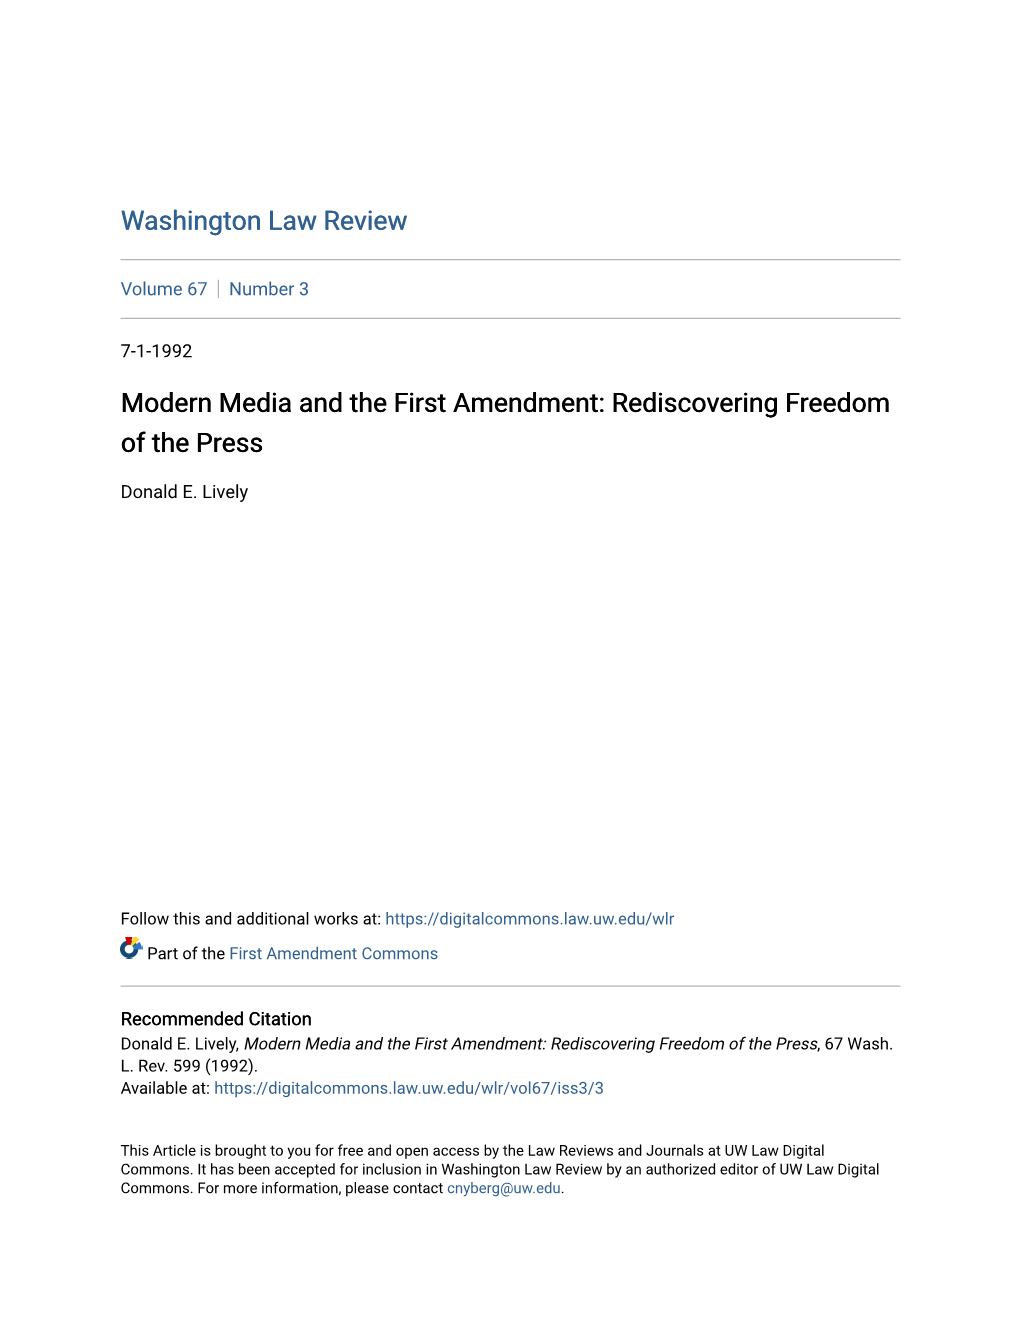 Modern Media and the First Amendment: Rediscovering Freedom of the Press